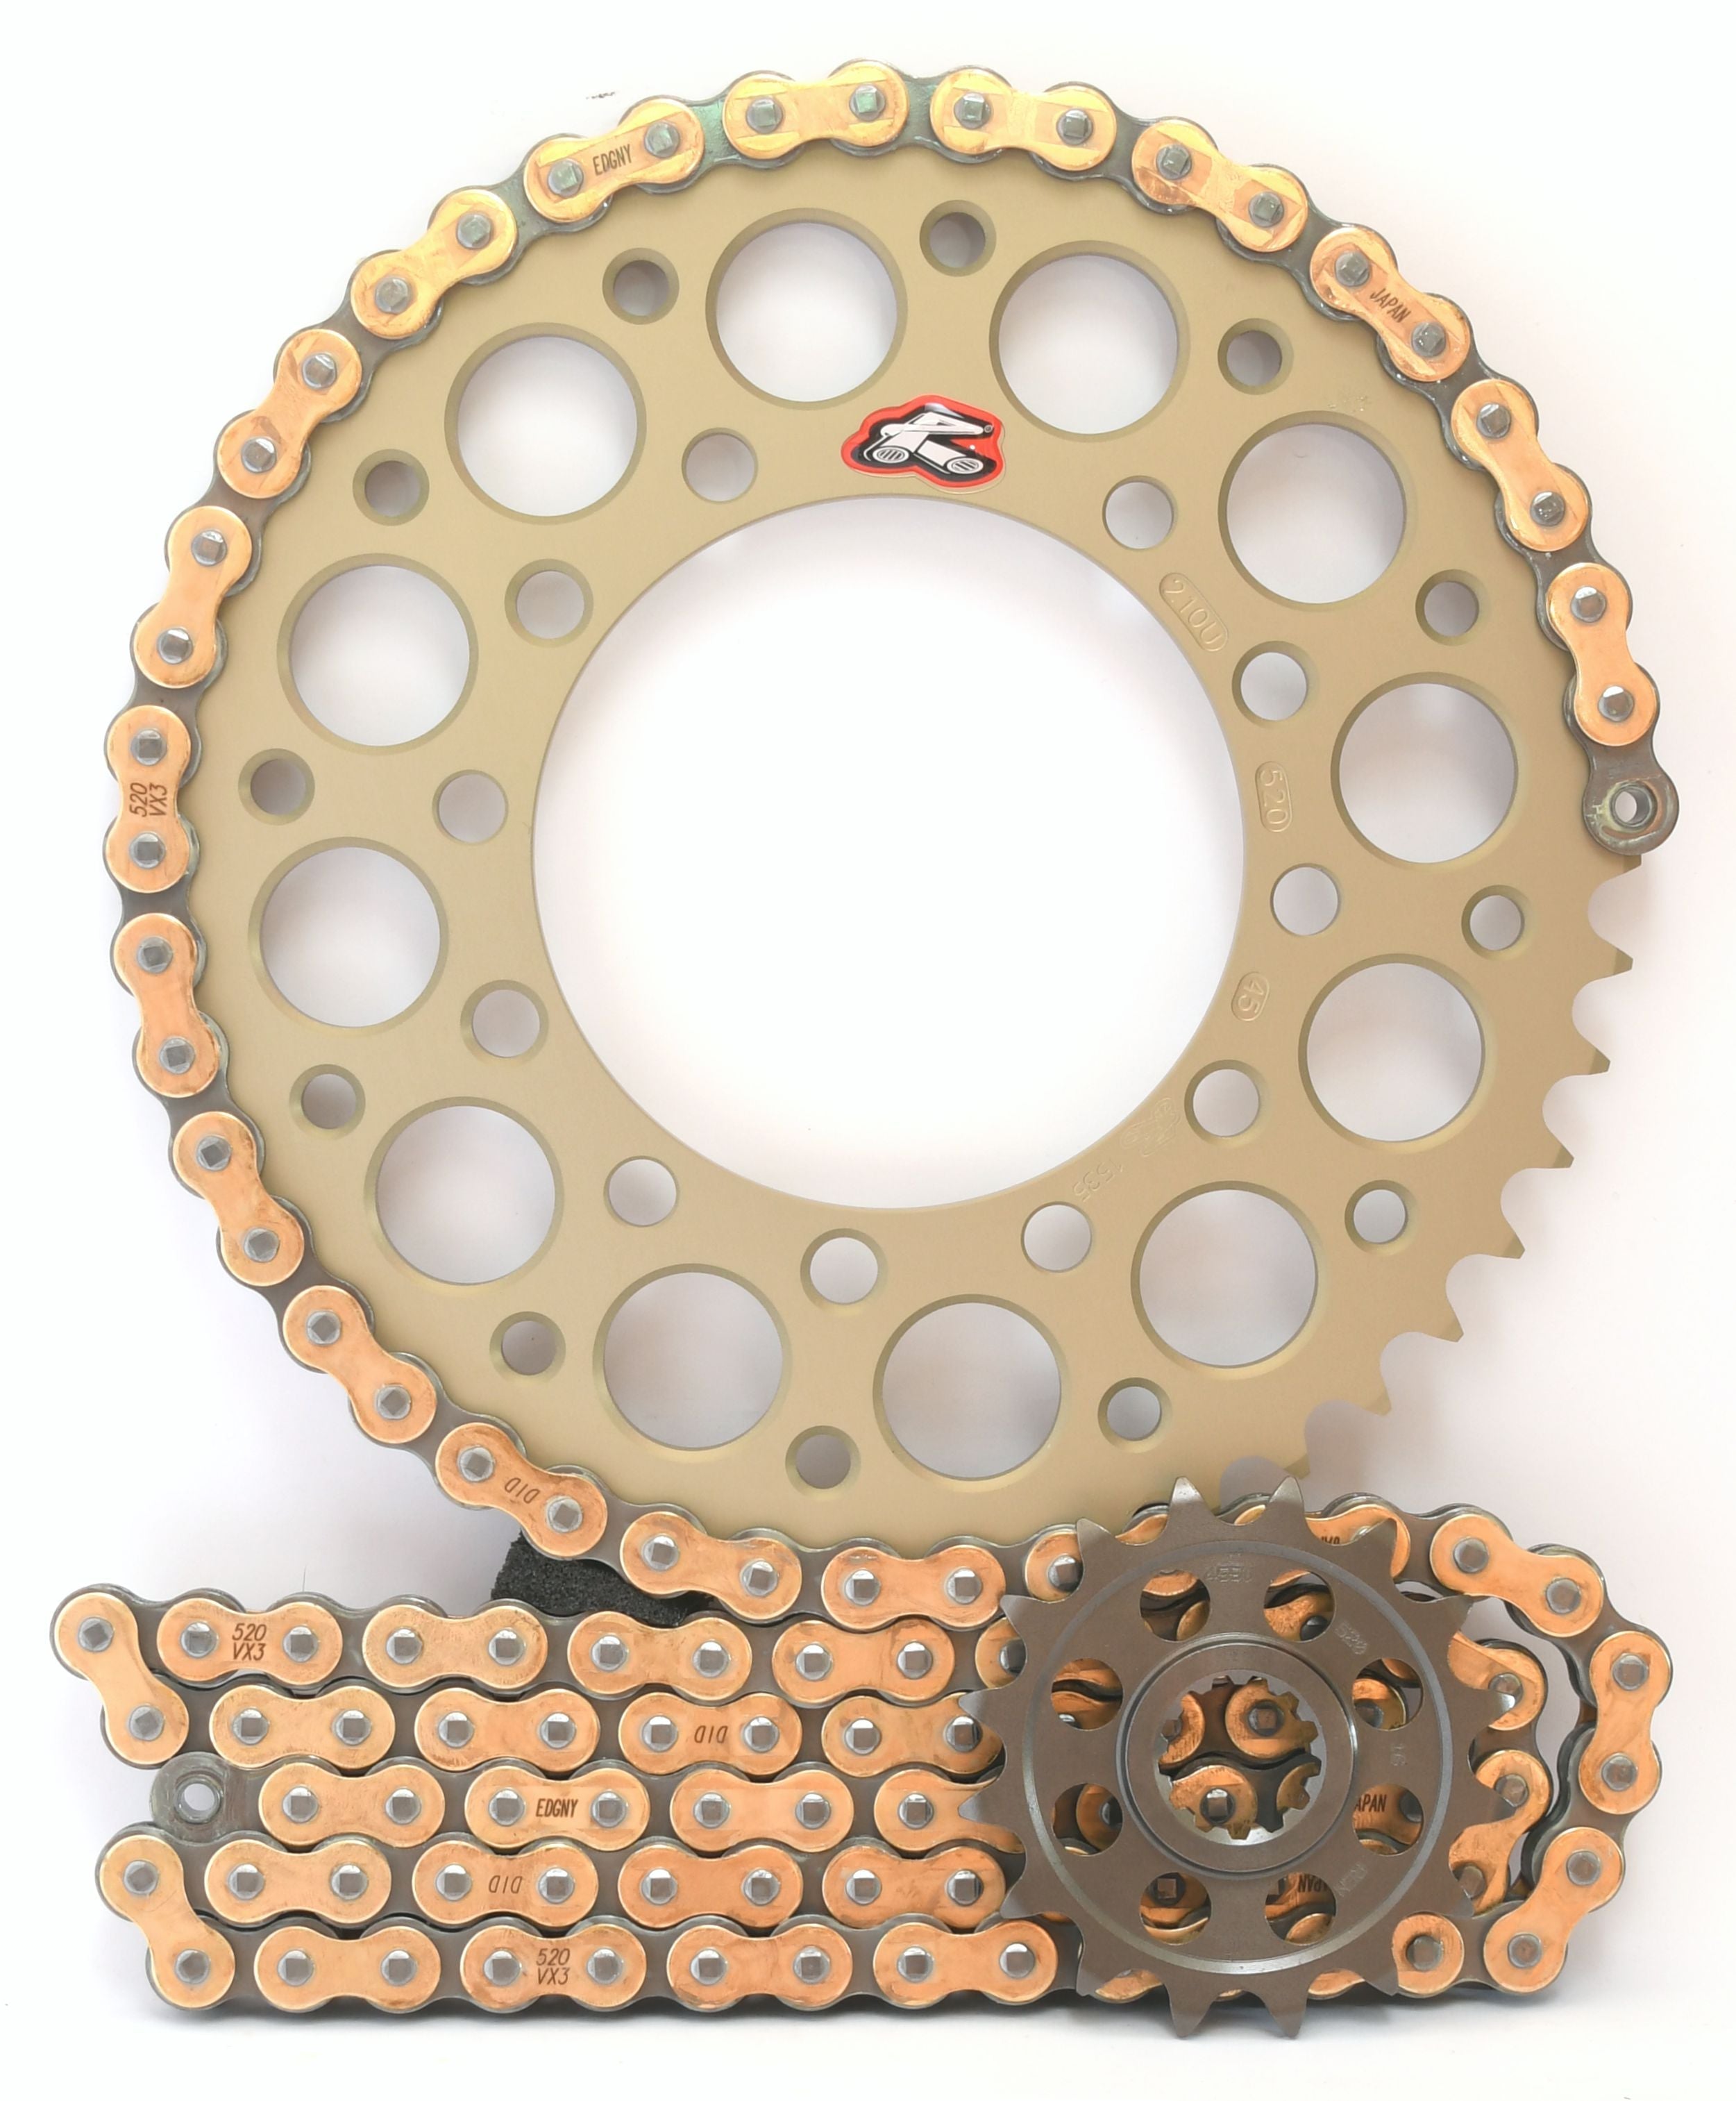 Renthal Ultralight and DID 520 Conversion Chain & Sprocket Kit for Yamaha YZF R1 1998-2014 - Choose Your Gearing